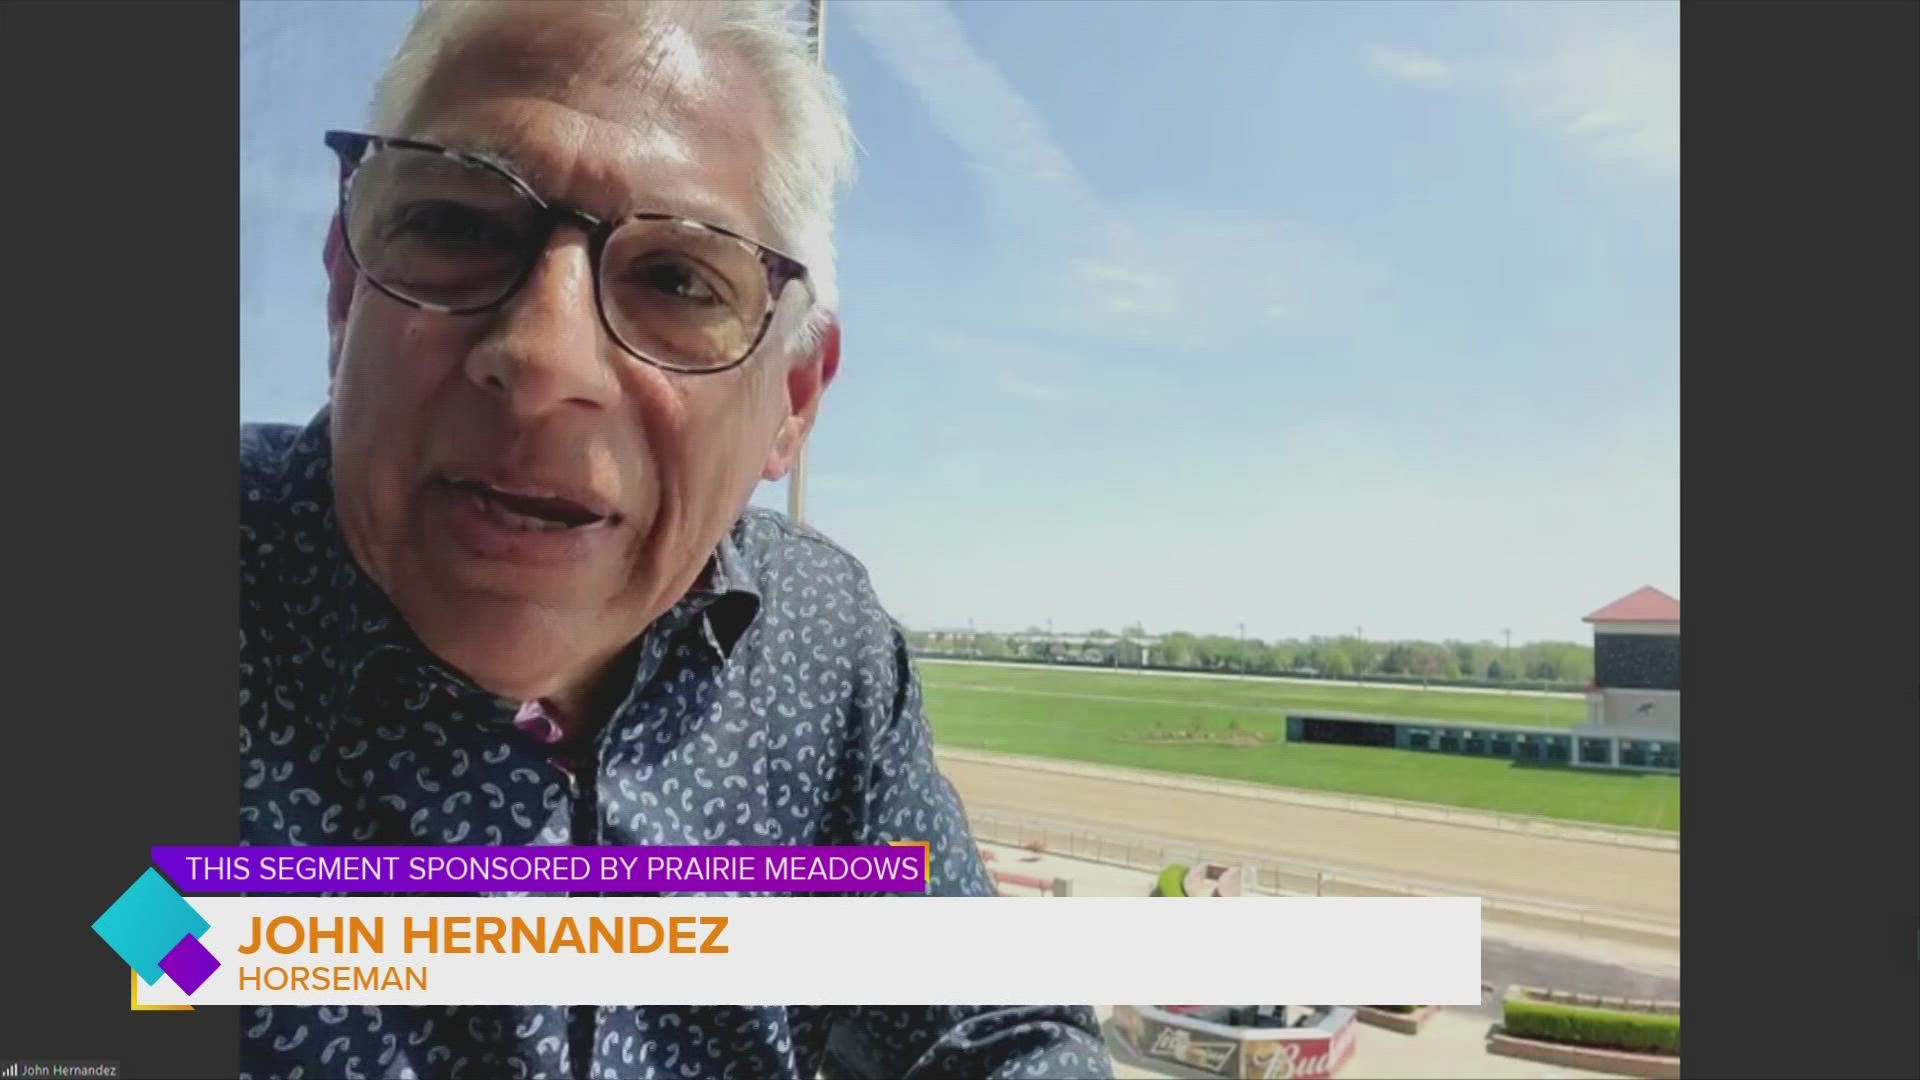 Horseman John Hernandez visits LIVE from Prairie Meadows Prairie Meadows Racetrack, Casino and Hotel as we get set for the return of LIVE RACING Friday May 13, 2022